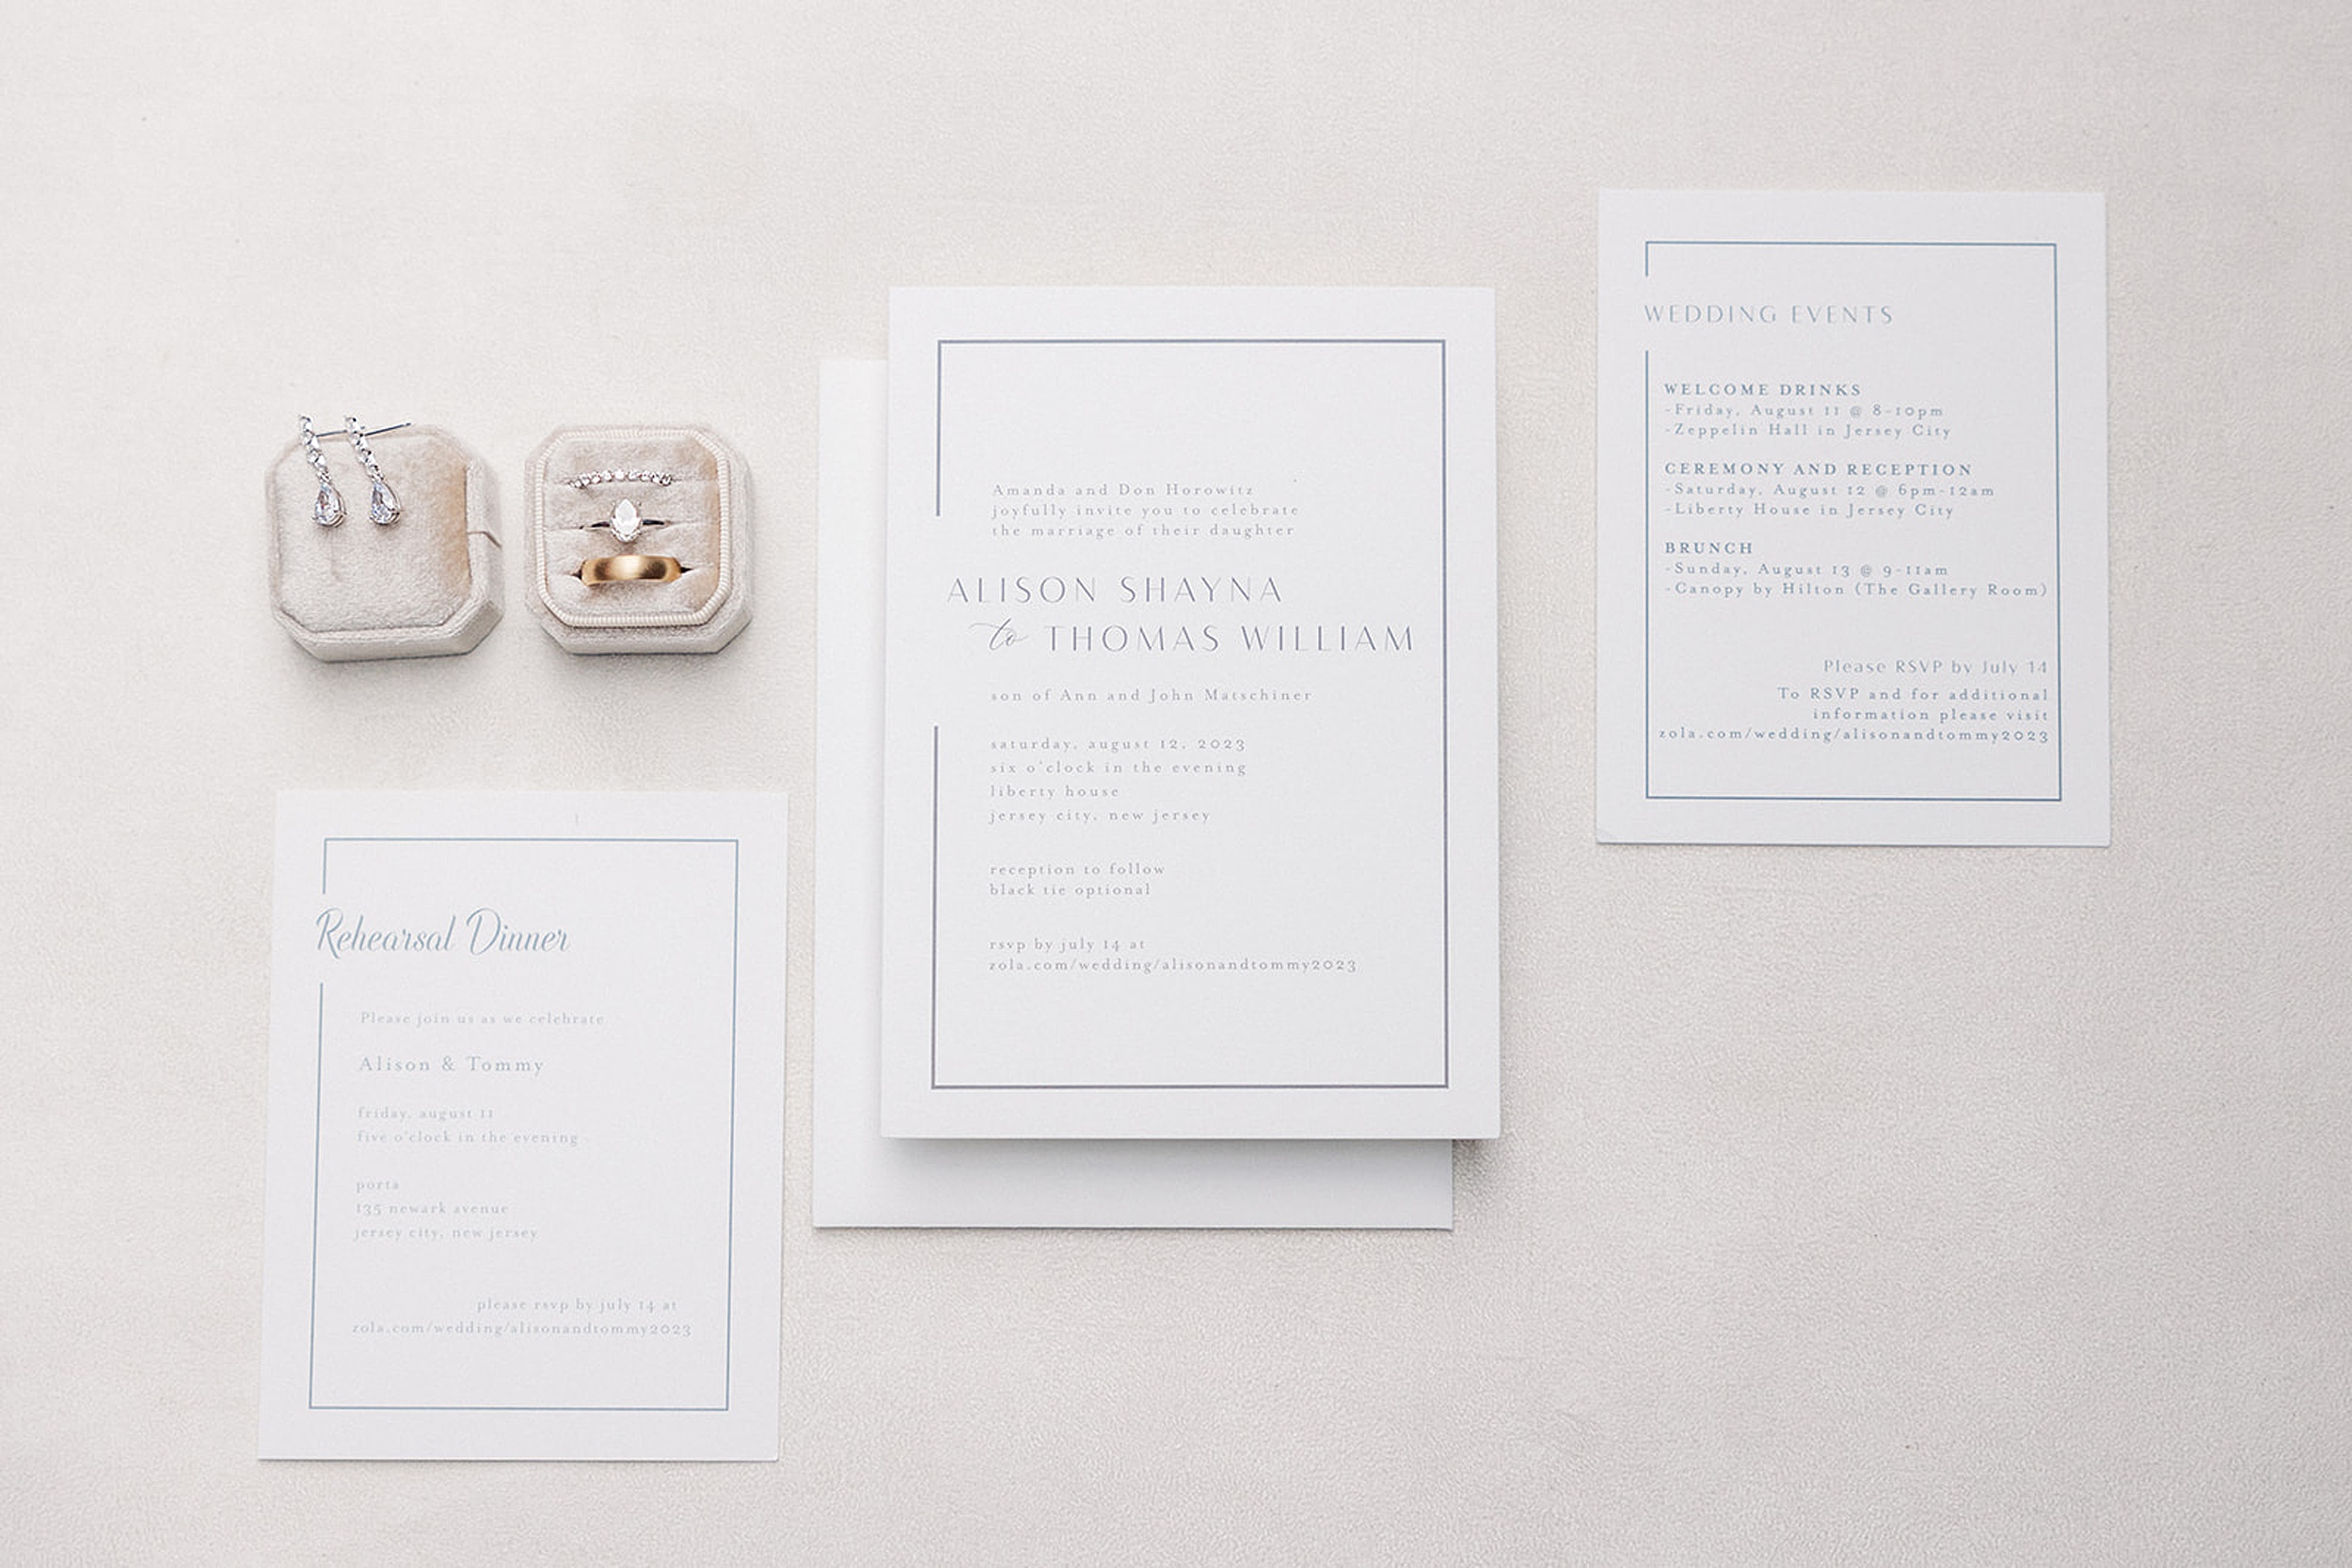 Details of wedding invitations and bridal jewelry